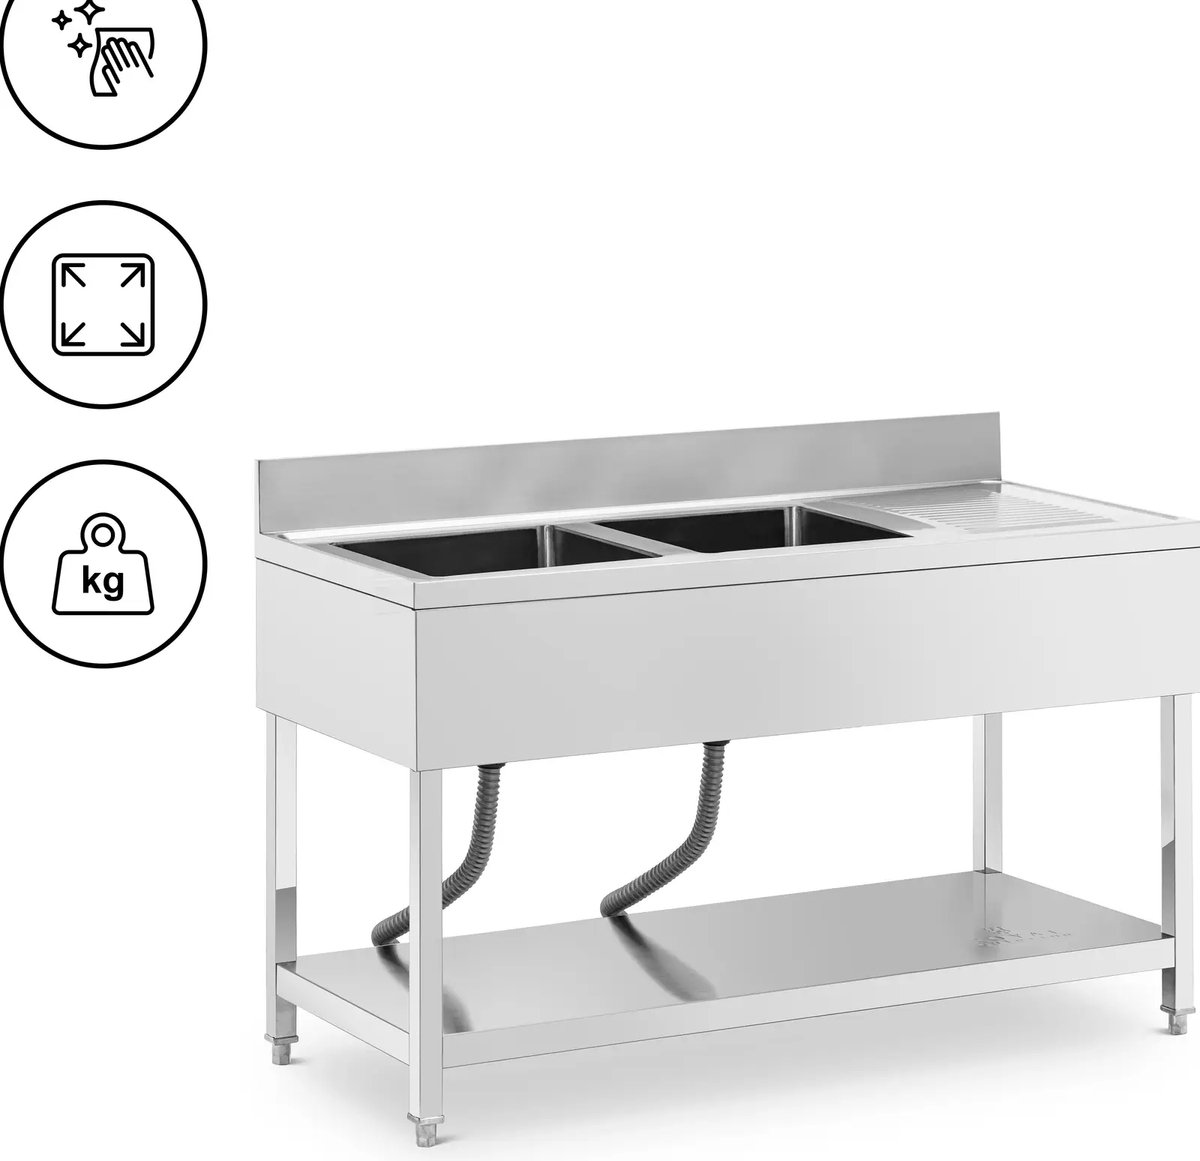 Royal Catering Rinse Table - 2 pools - roestvrij staal - 140 x 60 x 97 cm - Royal Catering